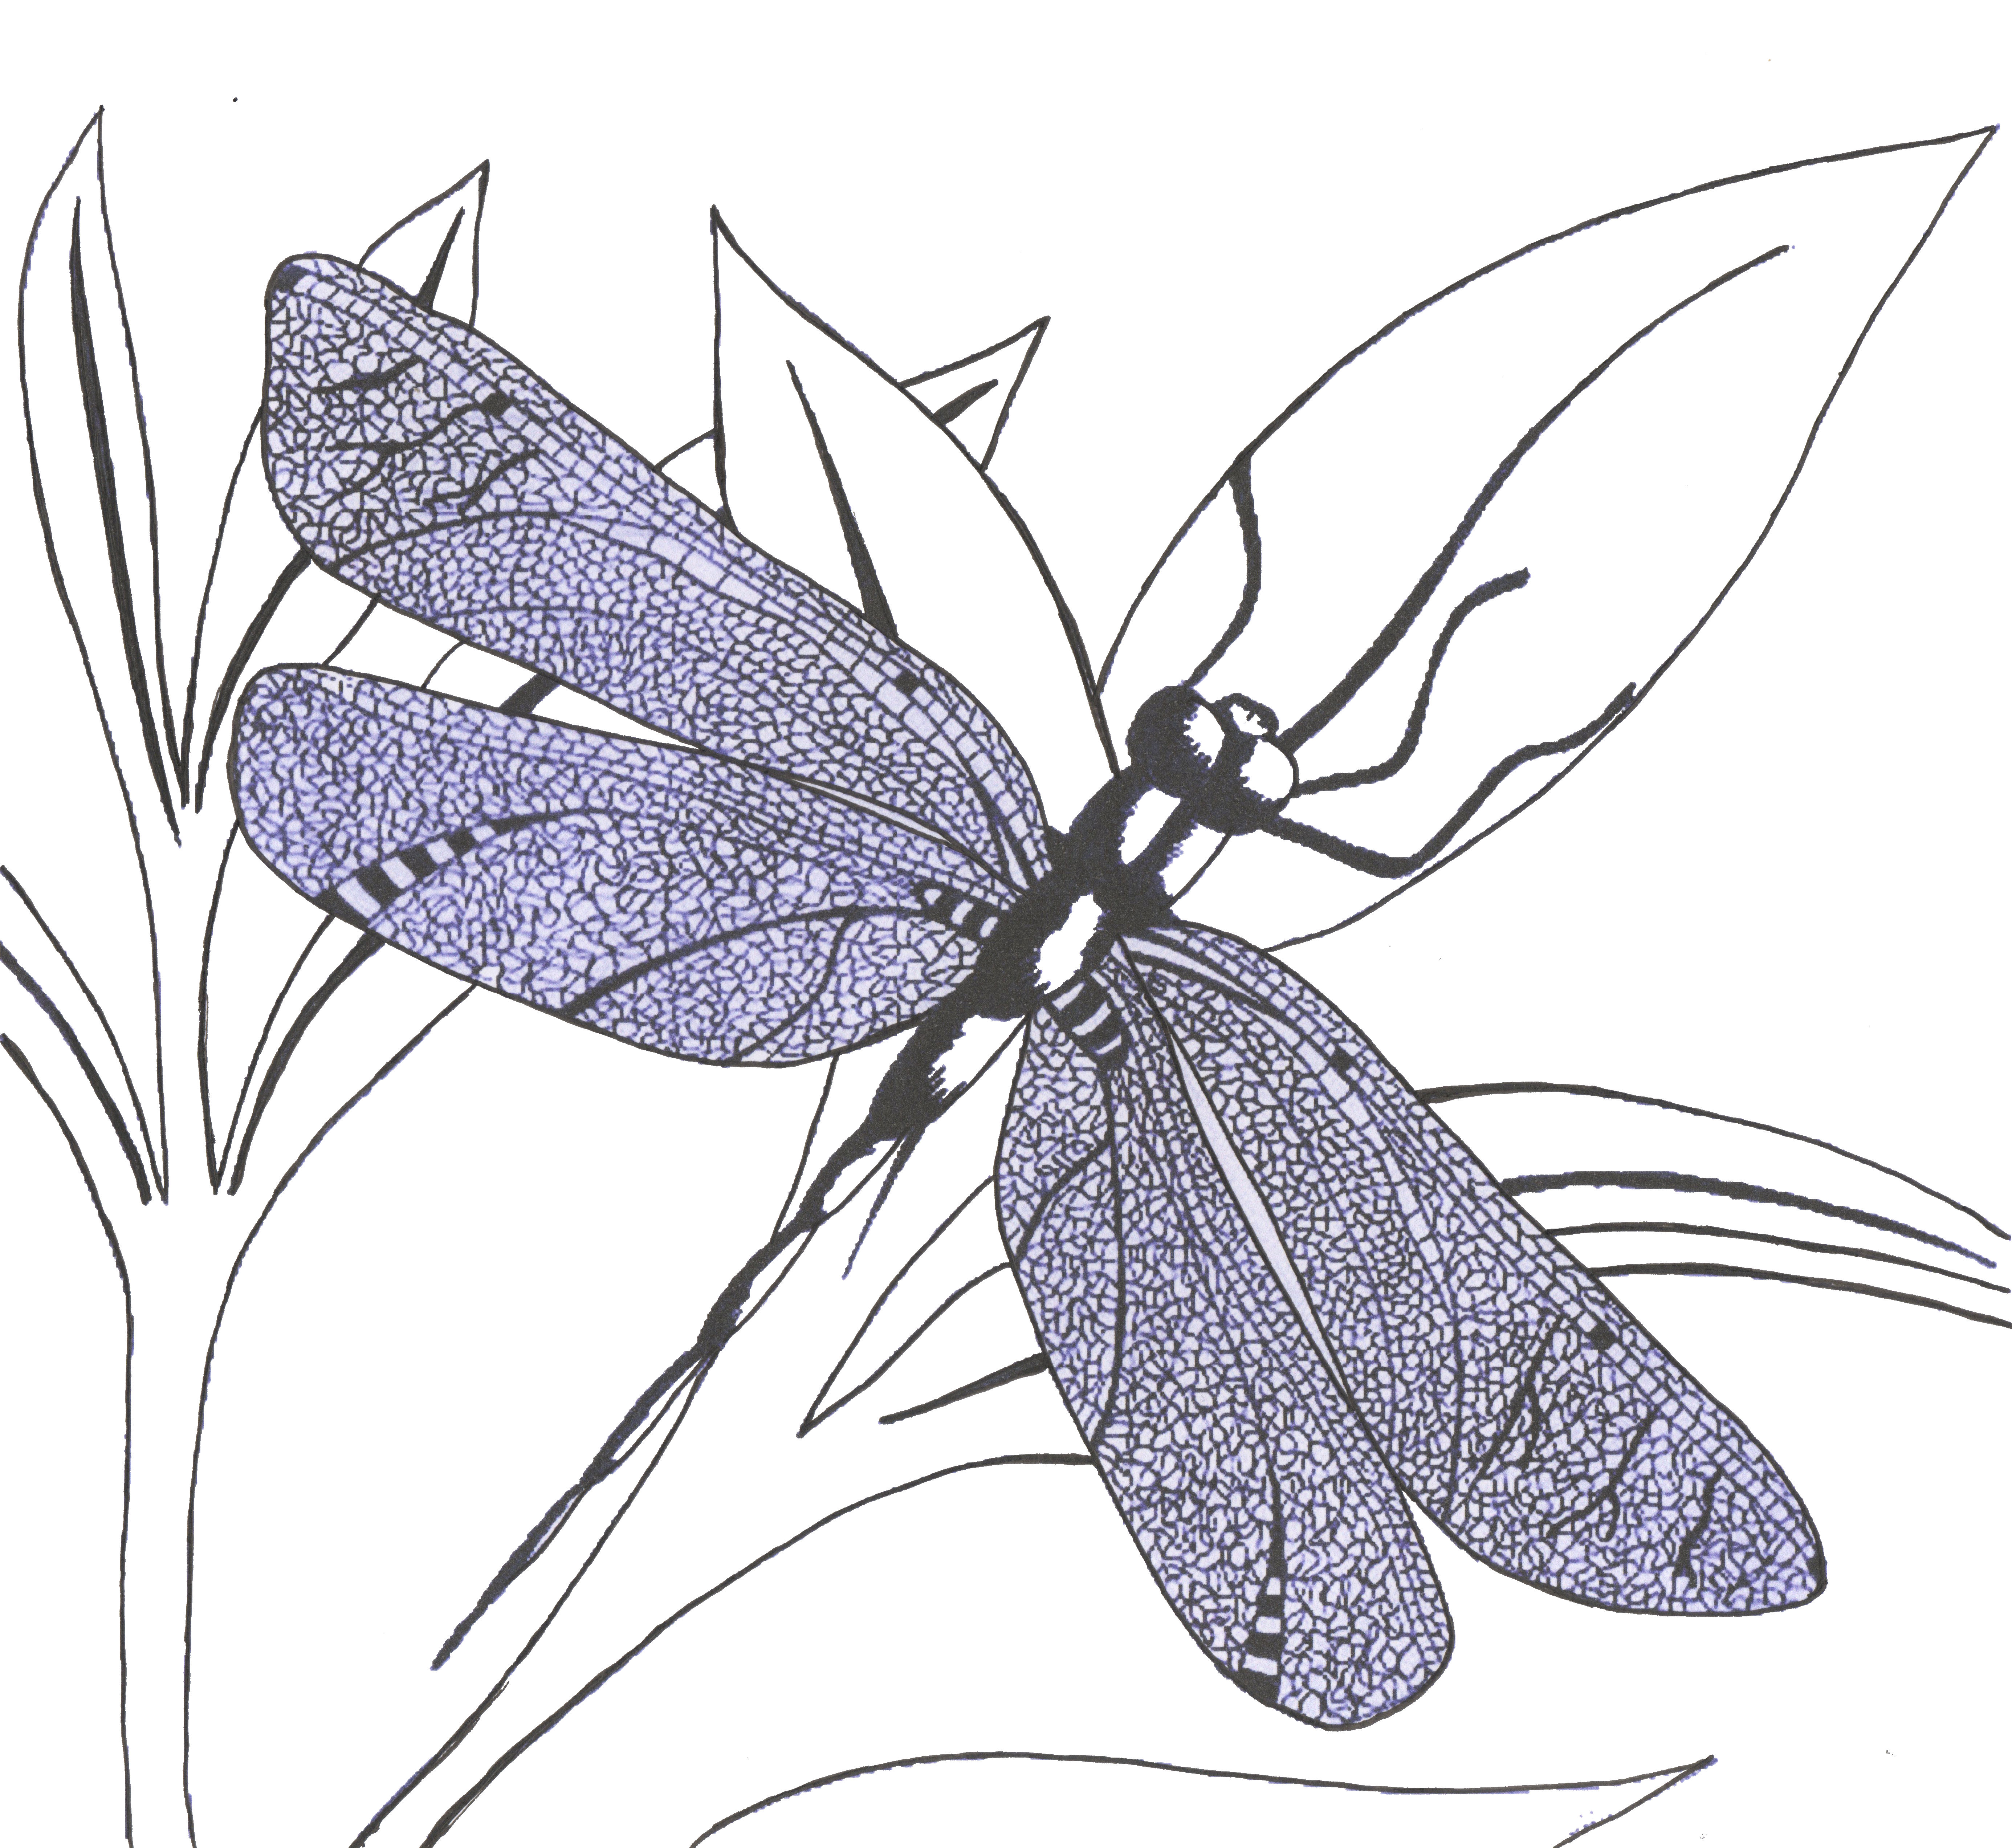 Free Dragon Fly Drawings, Download Free Dragon Fly Drawings png images ...